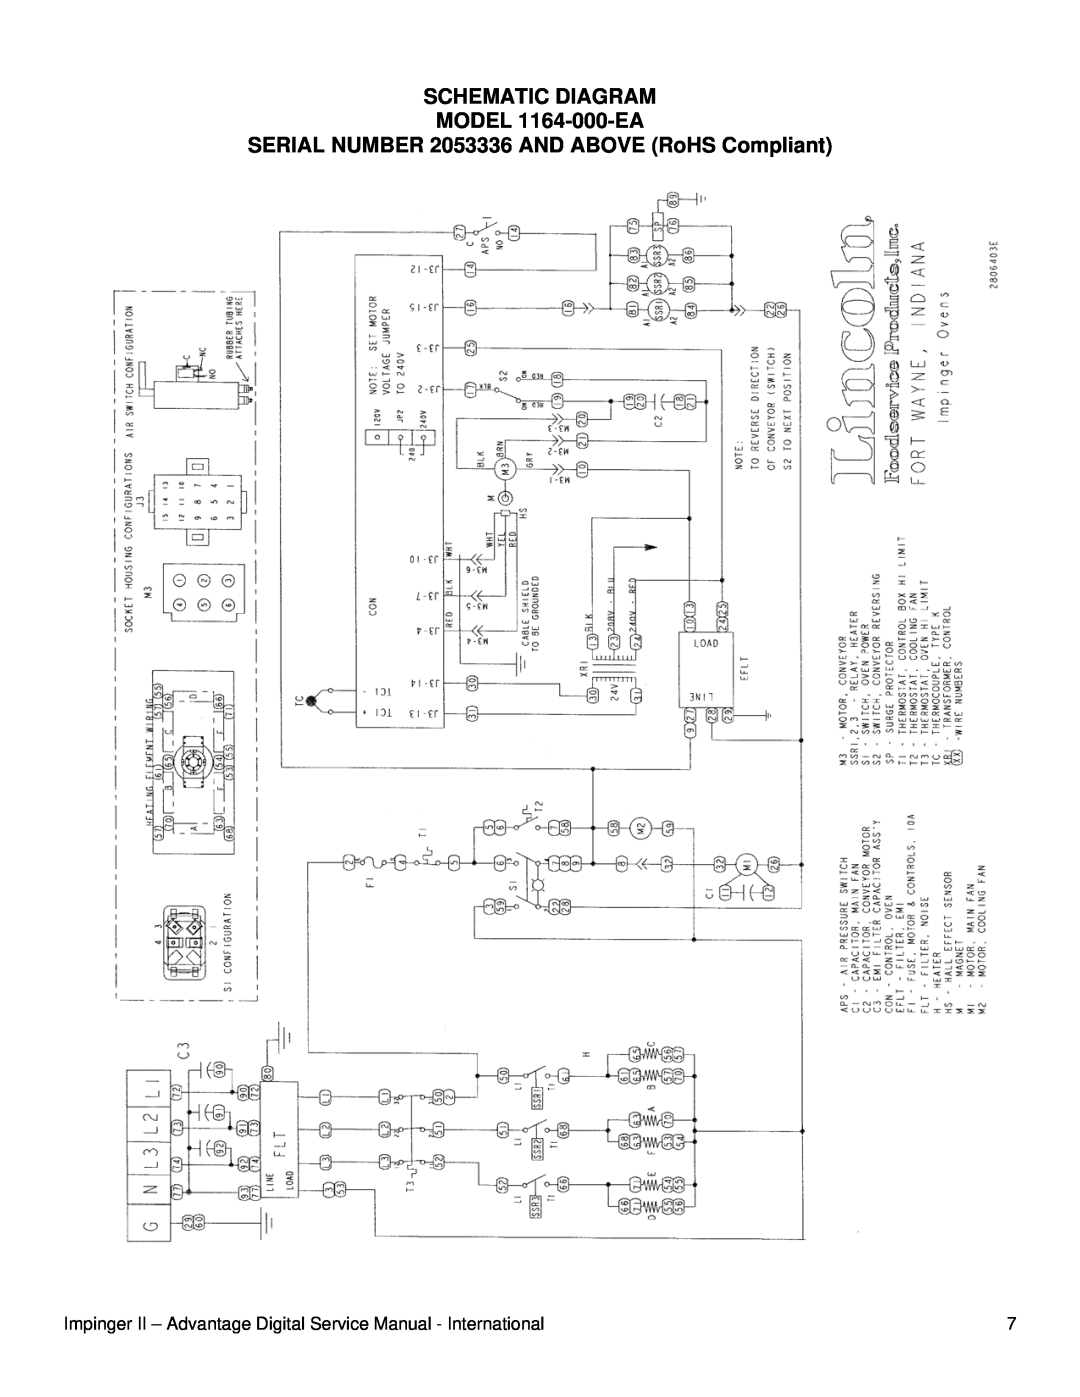 Lincoln 1154-000-EA, 1155-000-EA SERIAL NUMBER 2053336 AND ABOVE RoHS Compliant, SCHEMATIC DIAGRAM MODEL 1164-000-EA 